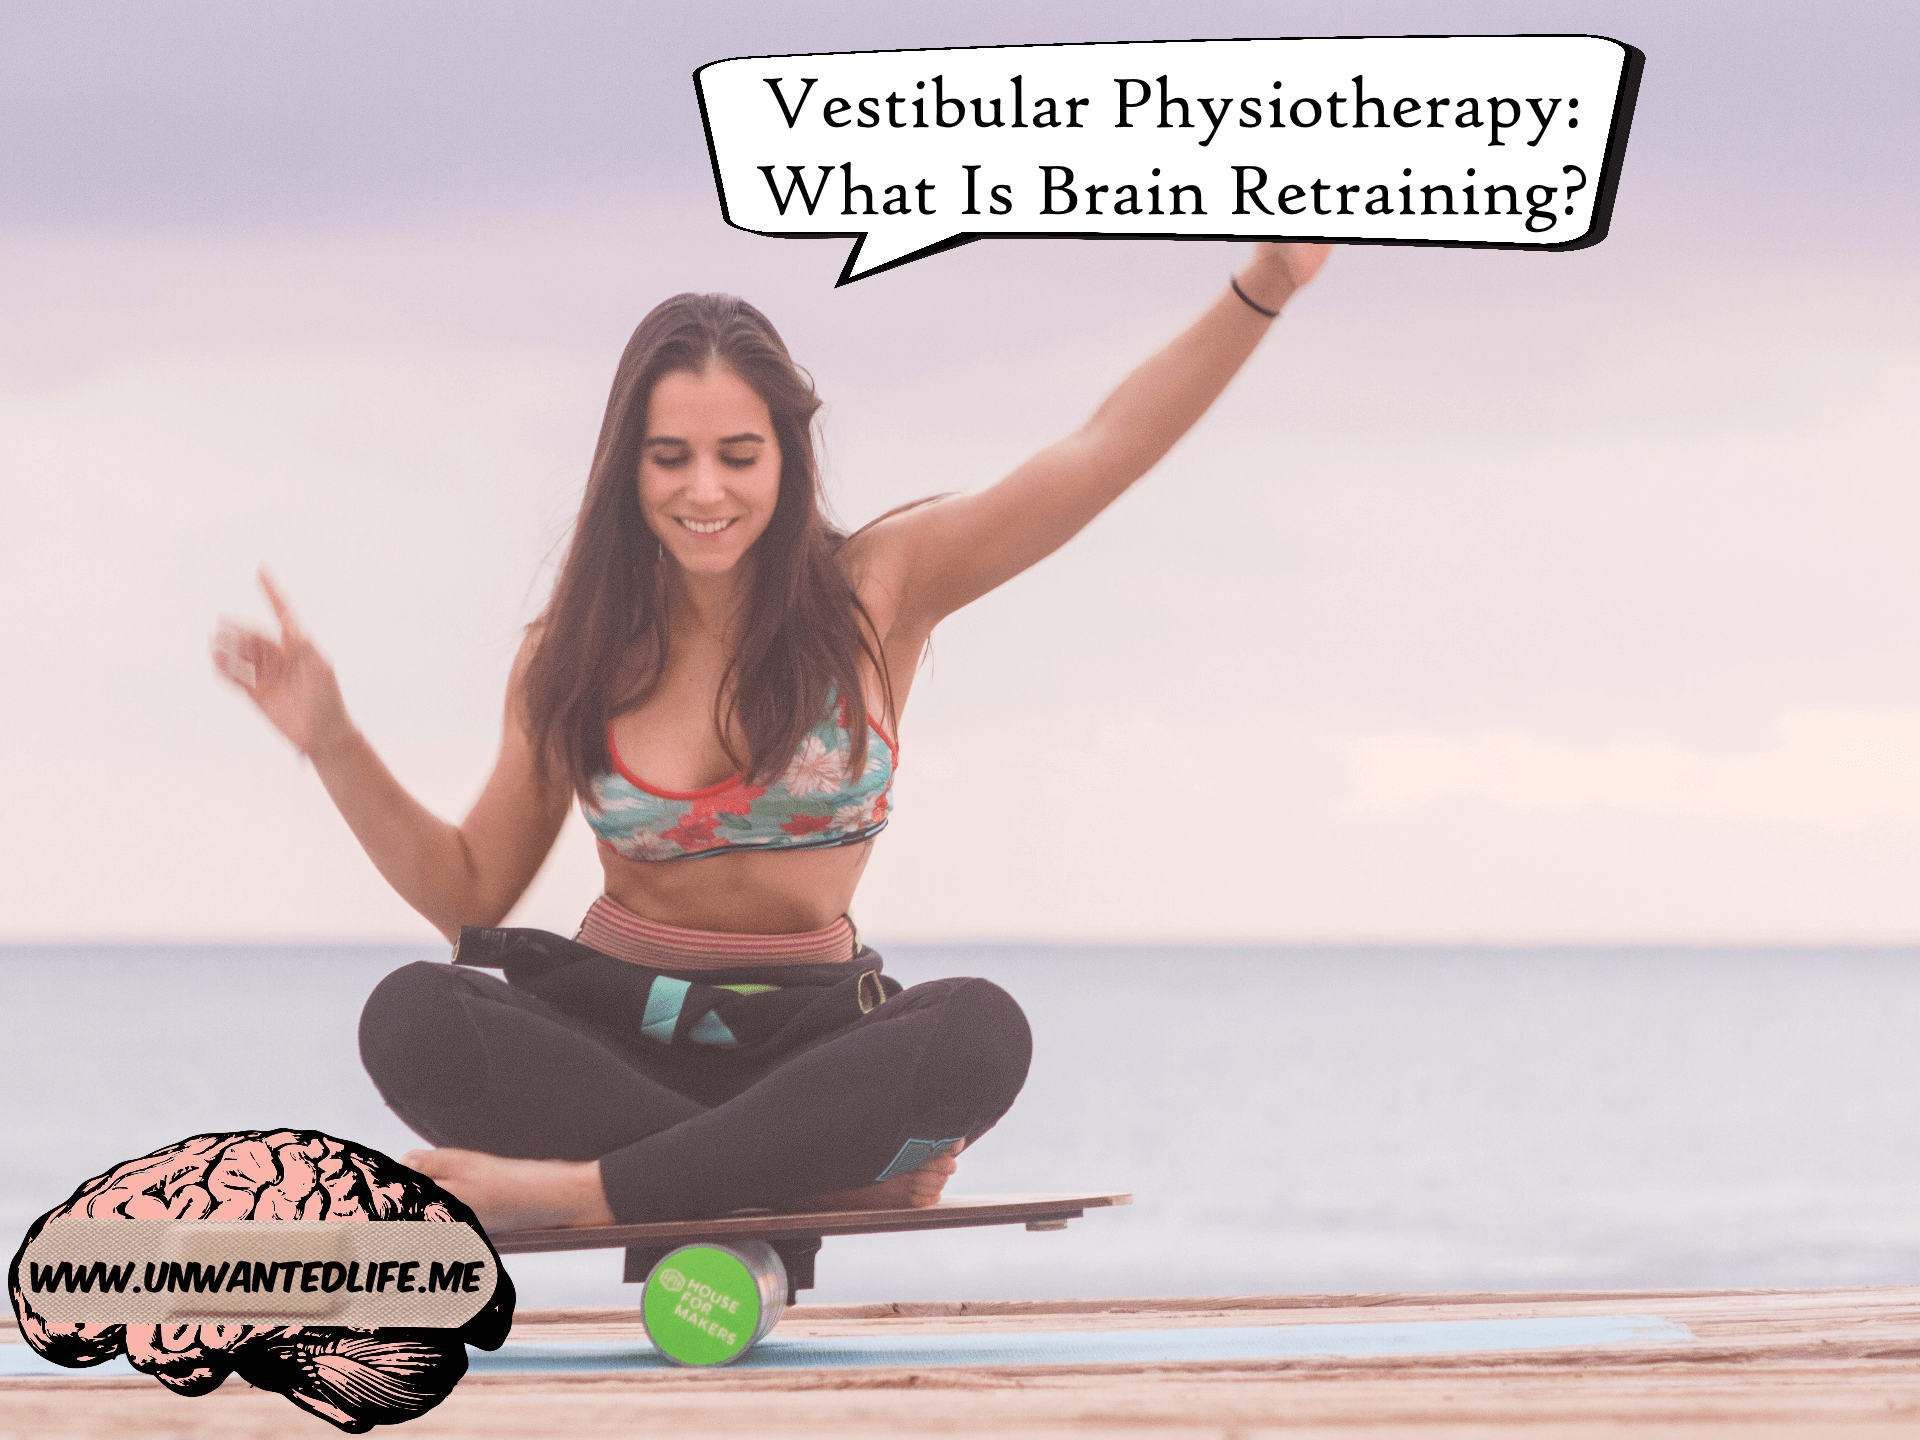 A photo of a white woman sitting and balancing on a yoga balance board with a speech bubble coming from her that says - Vestibular Physiotherapy: What Is Brain Retraining?